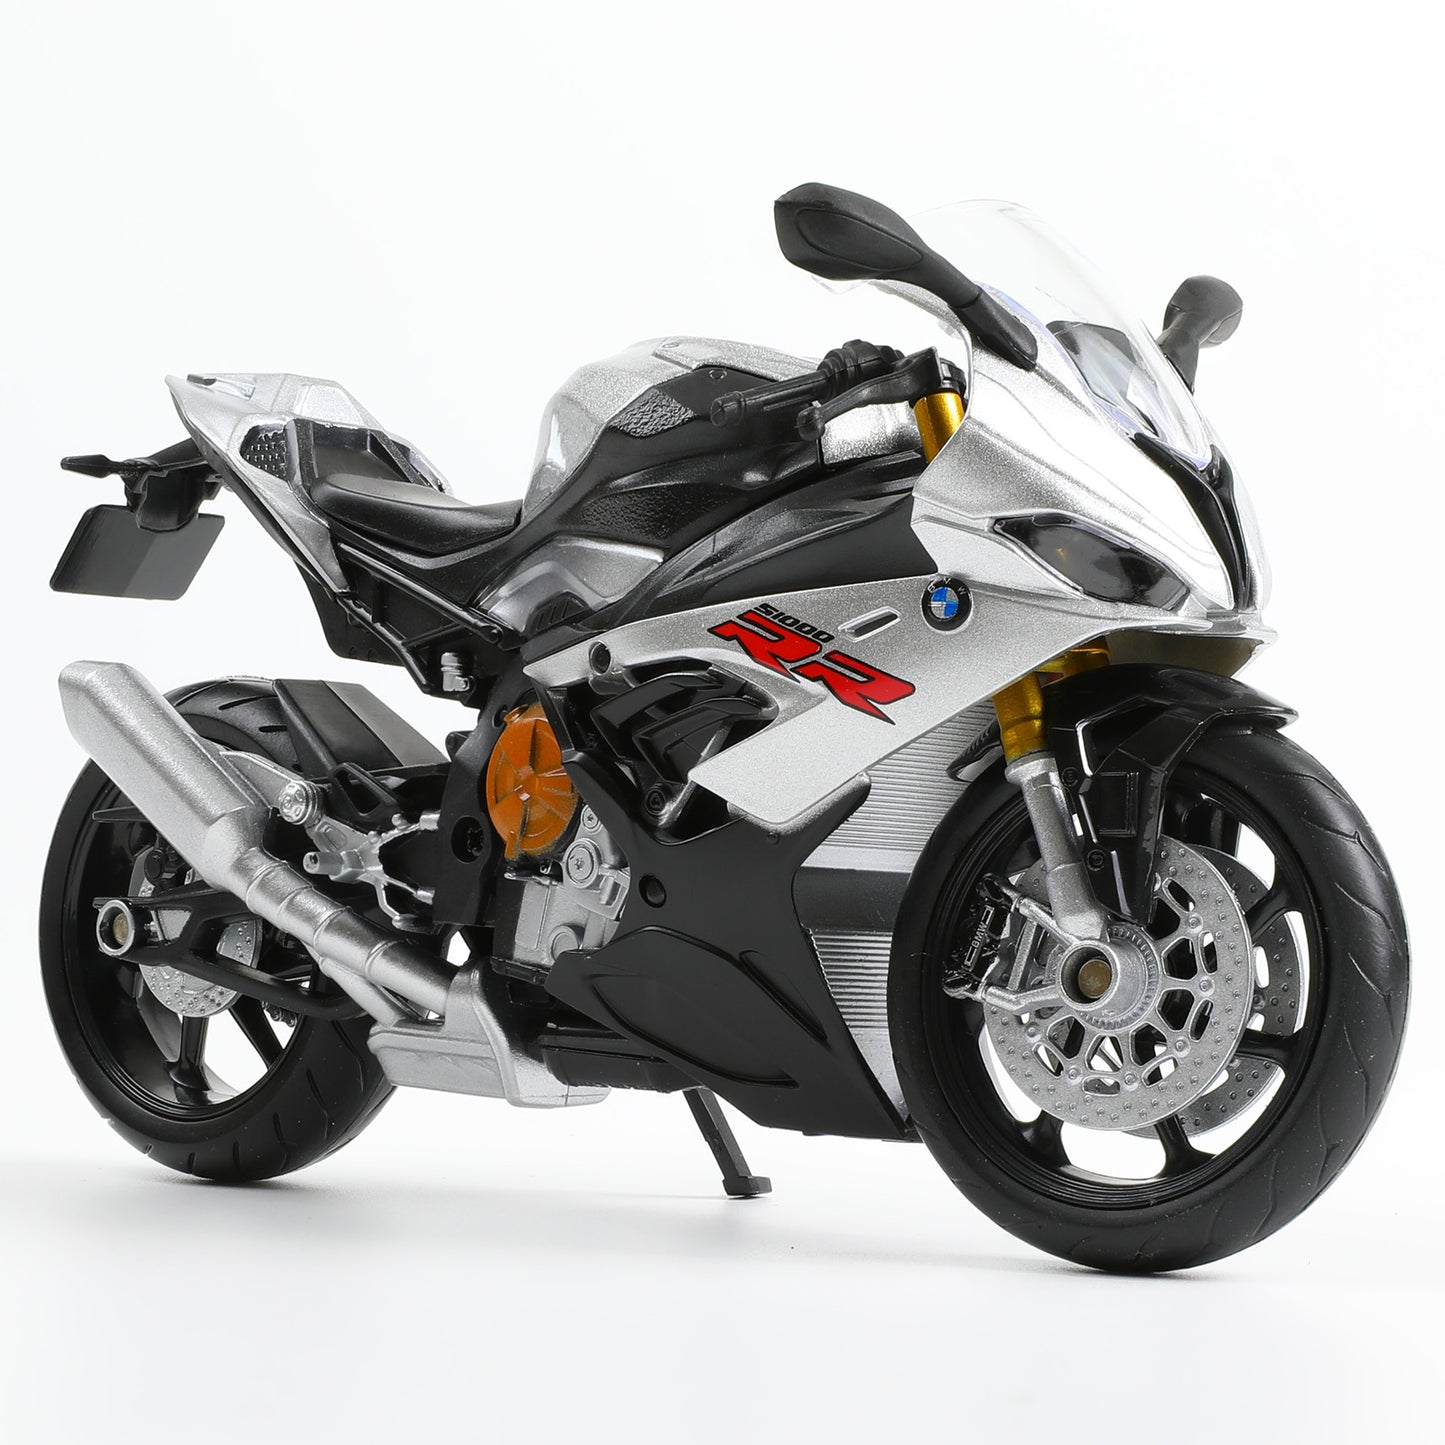 DieCast Motorcycle Model for BMW S1000RR, Realistic Motorcycle Metal Model, 1:12 Scale Kids Moto Toy or Collection,MAKEDA Pre-Built Toys Gift